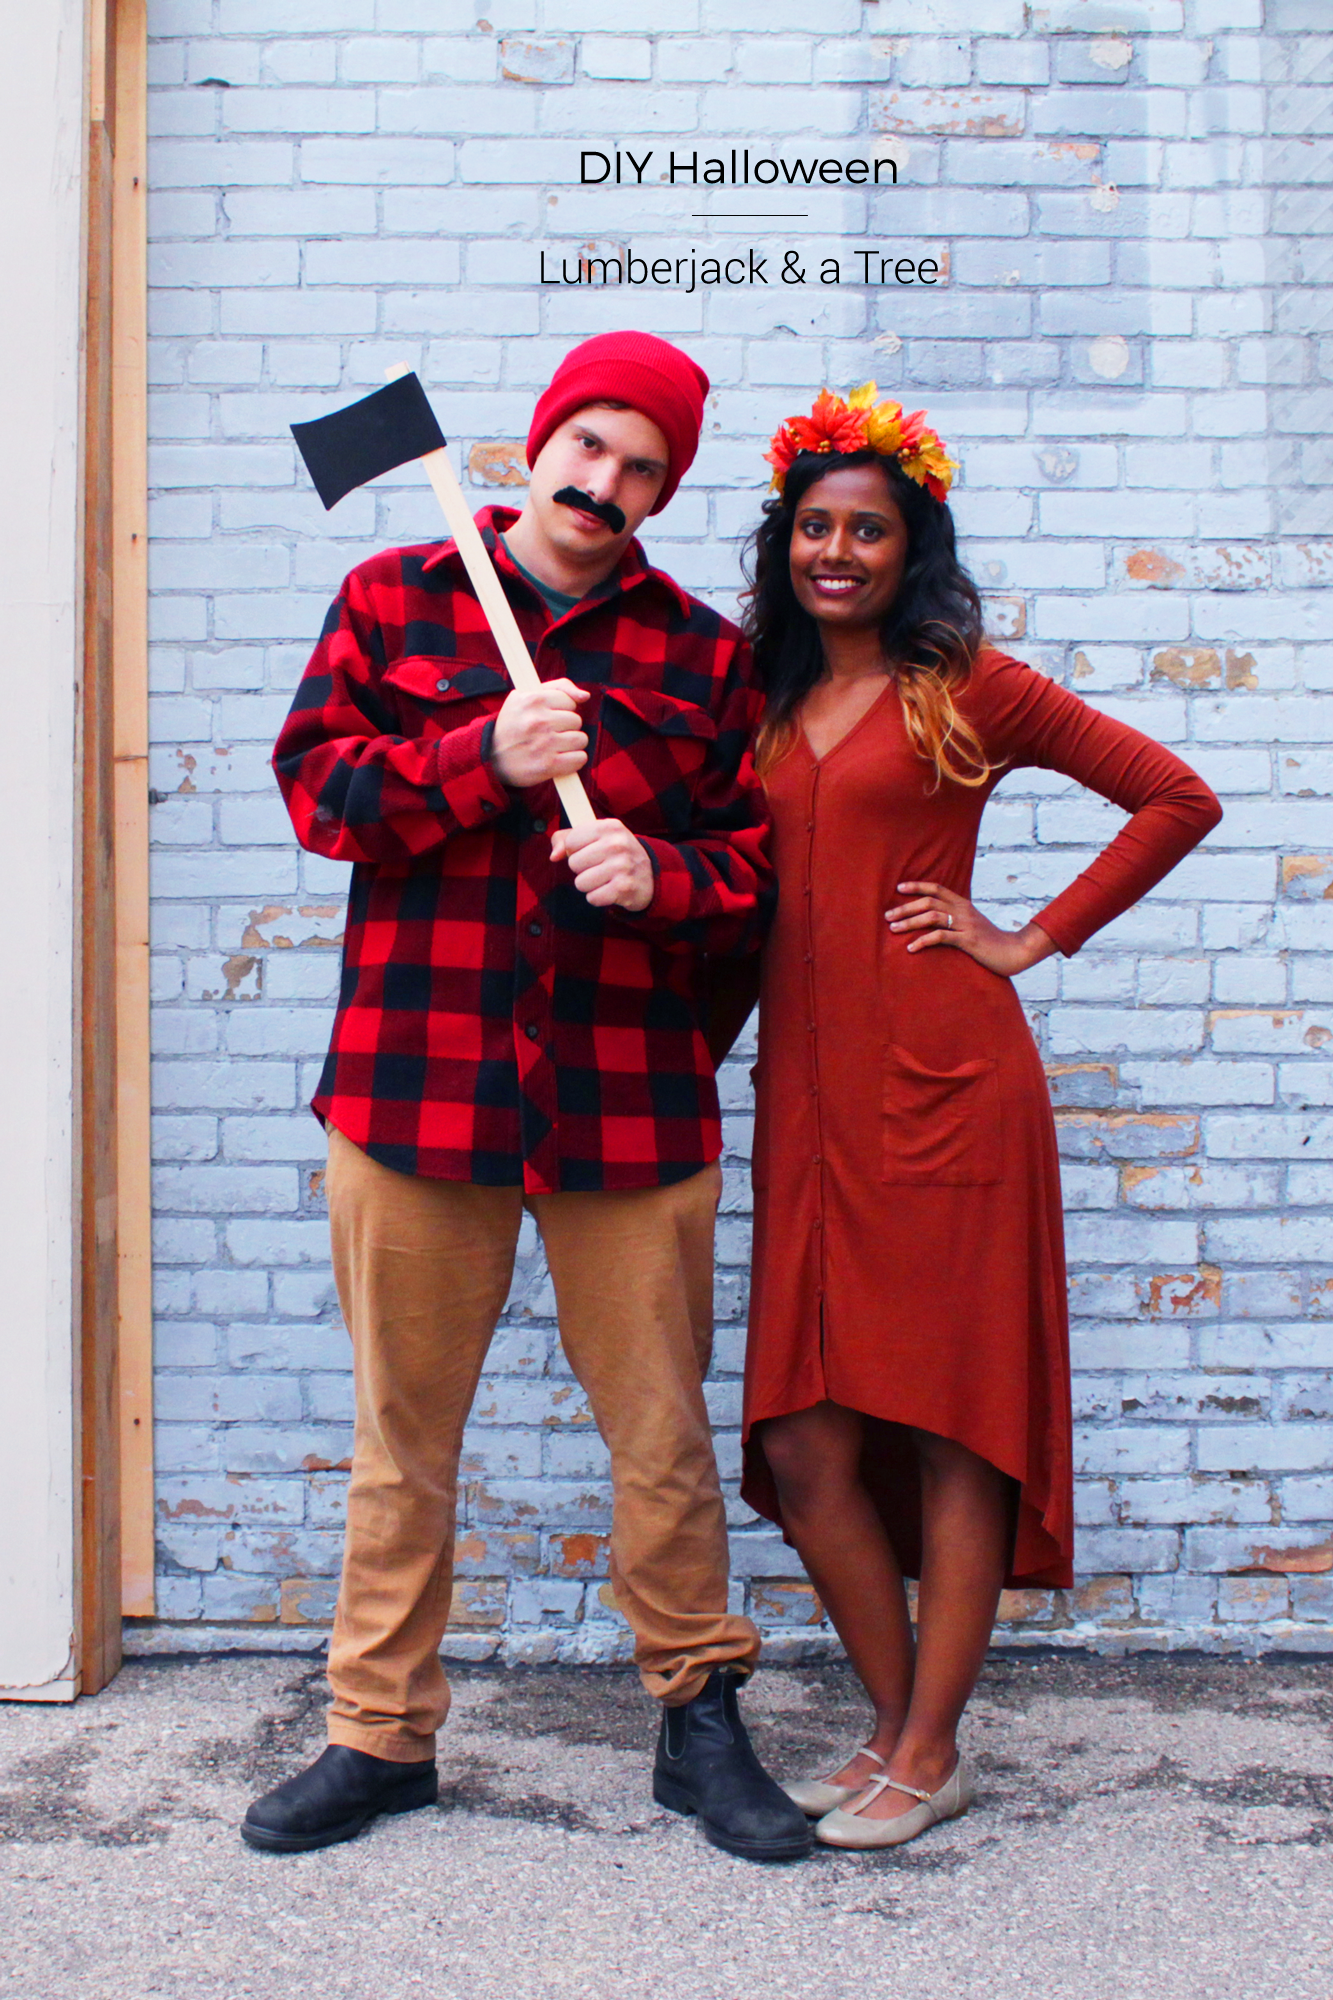 Diy Halloween Couples Costume Lumberjack And A Tree Fish And Bull